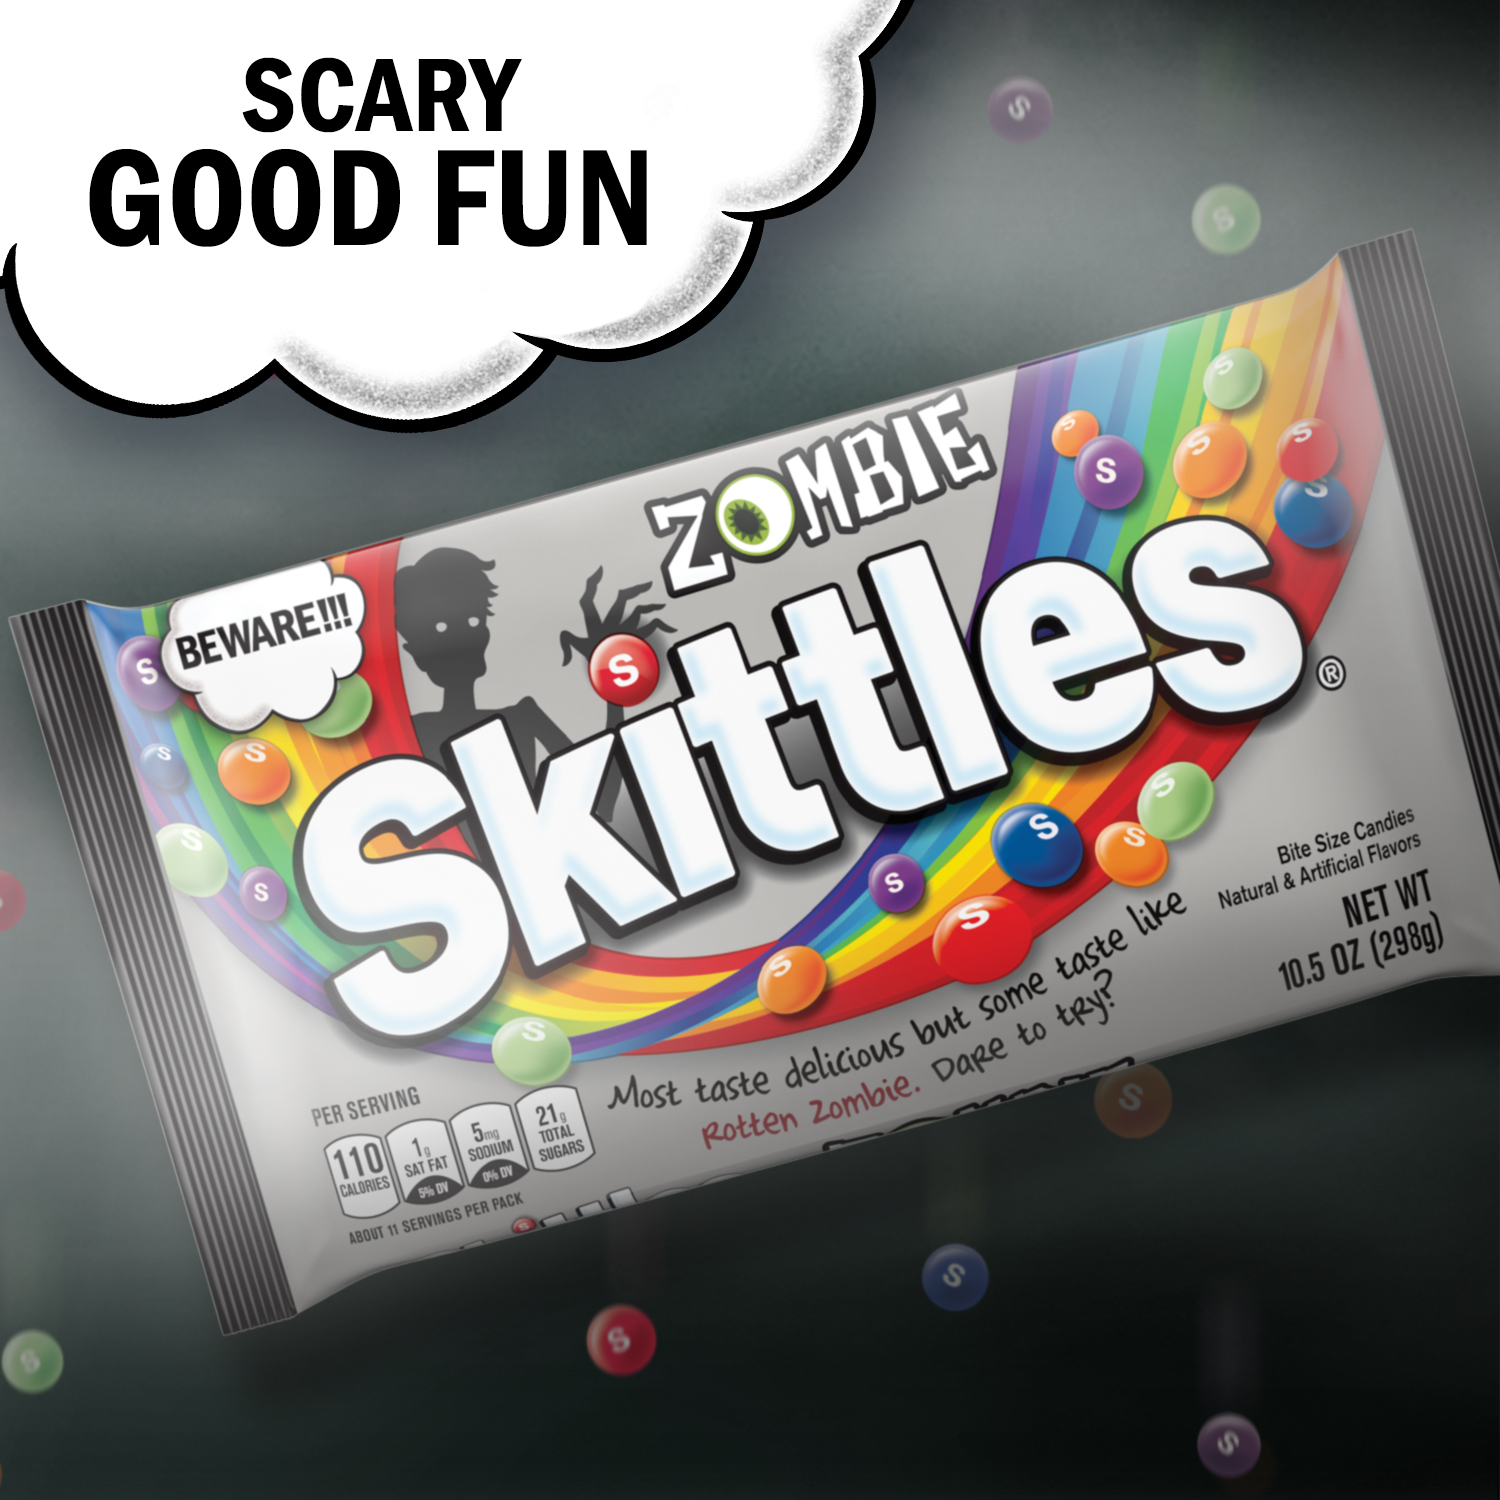 Zombie SKITTLES Halloween Candy, 10.5-Ounce Bag - image 4 of 8